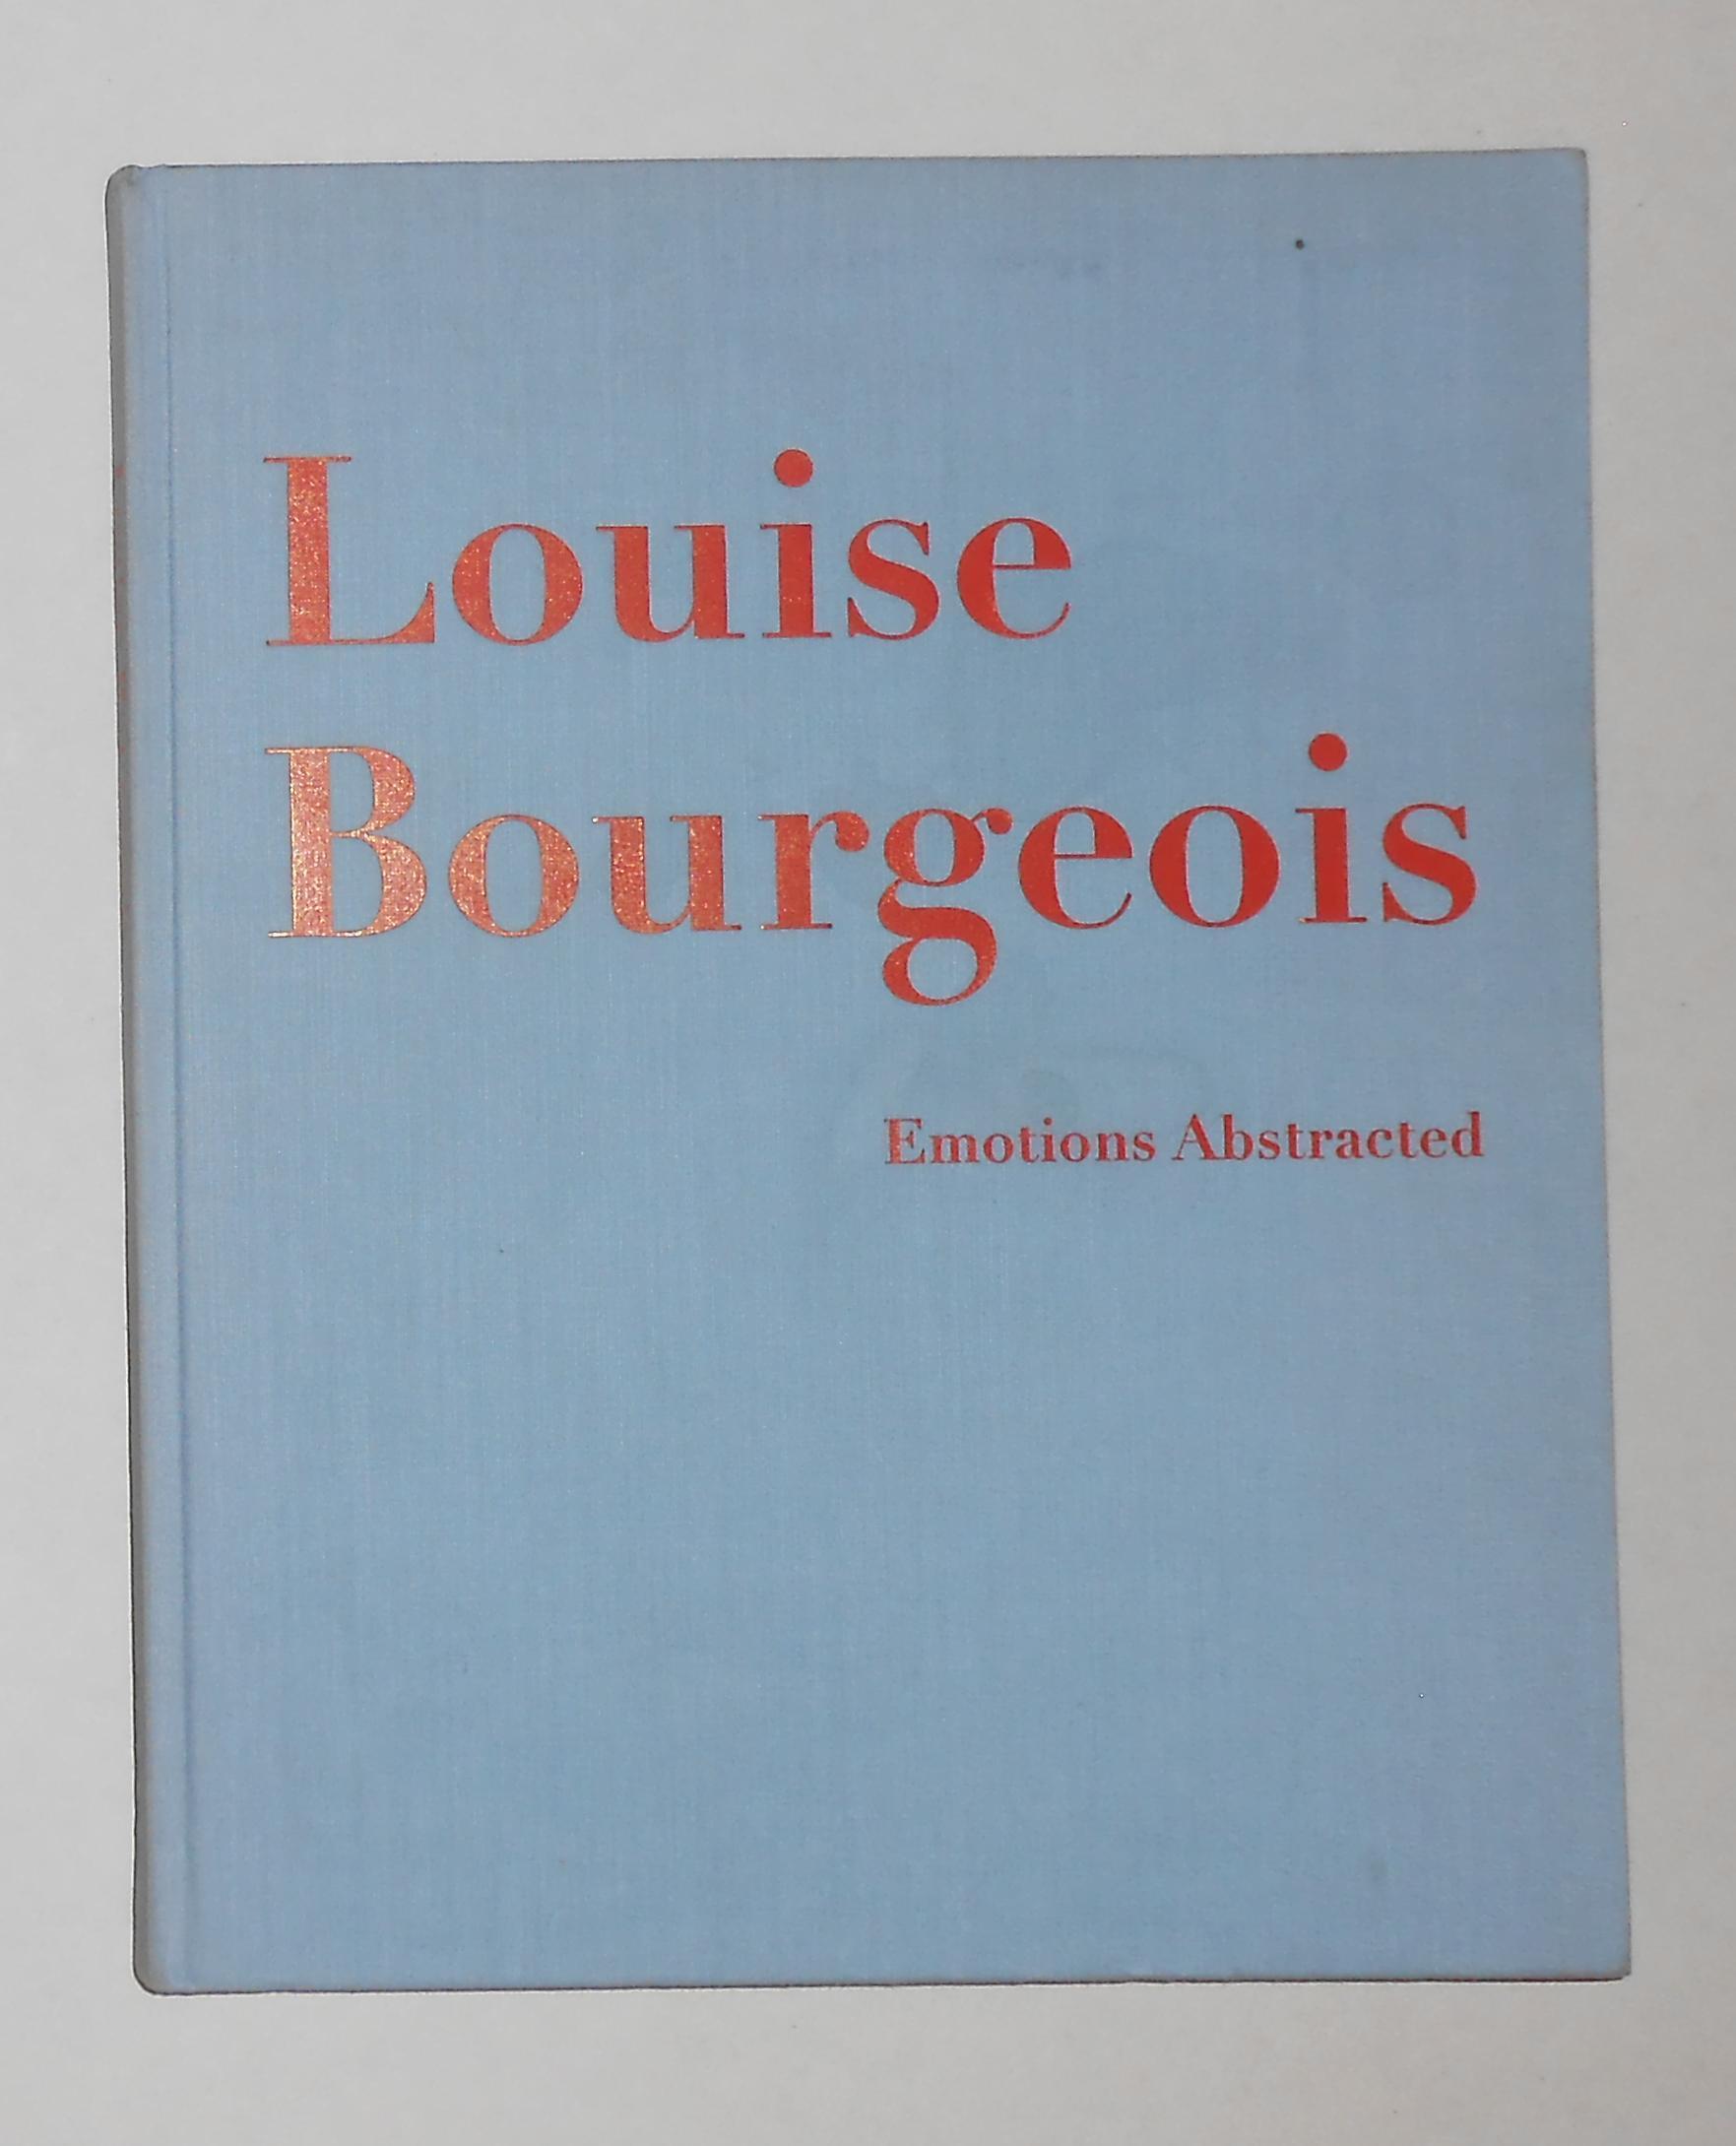 Louise Bourgeois - Emotions Abstracted (Daros, Zurich 13 March - 12 September 2004) - BOURGEOIS, Louise ] Eva Keller and Regula Malin (edit) Robert Storr, Jean De La Fontaine (essays)